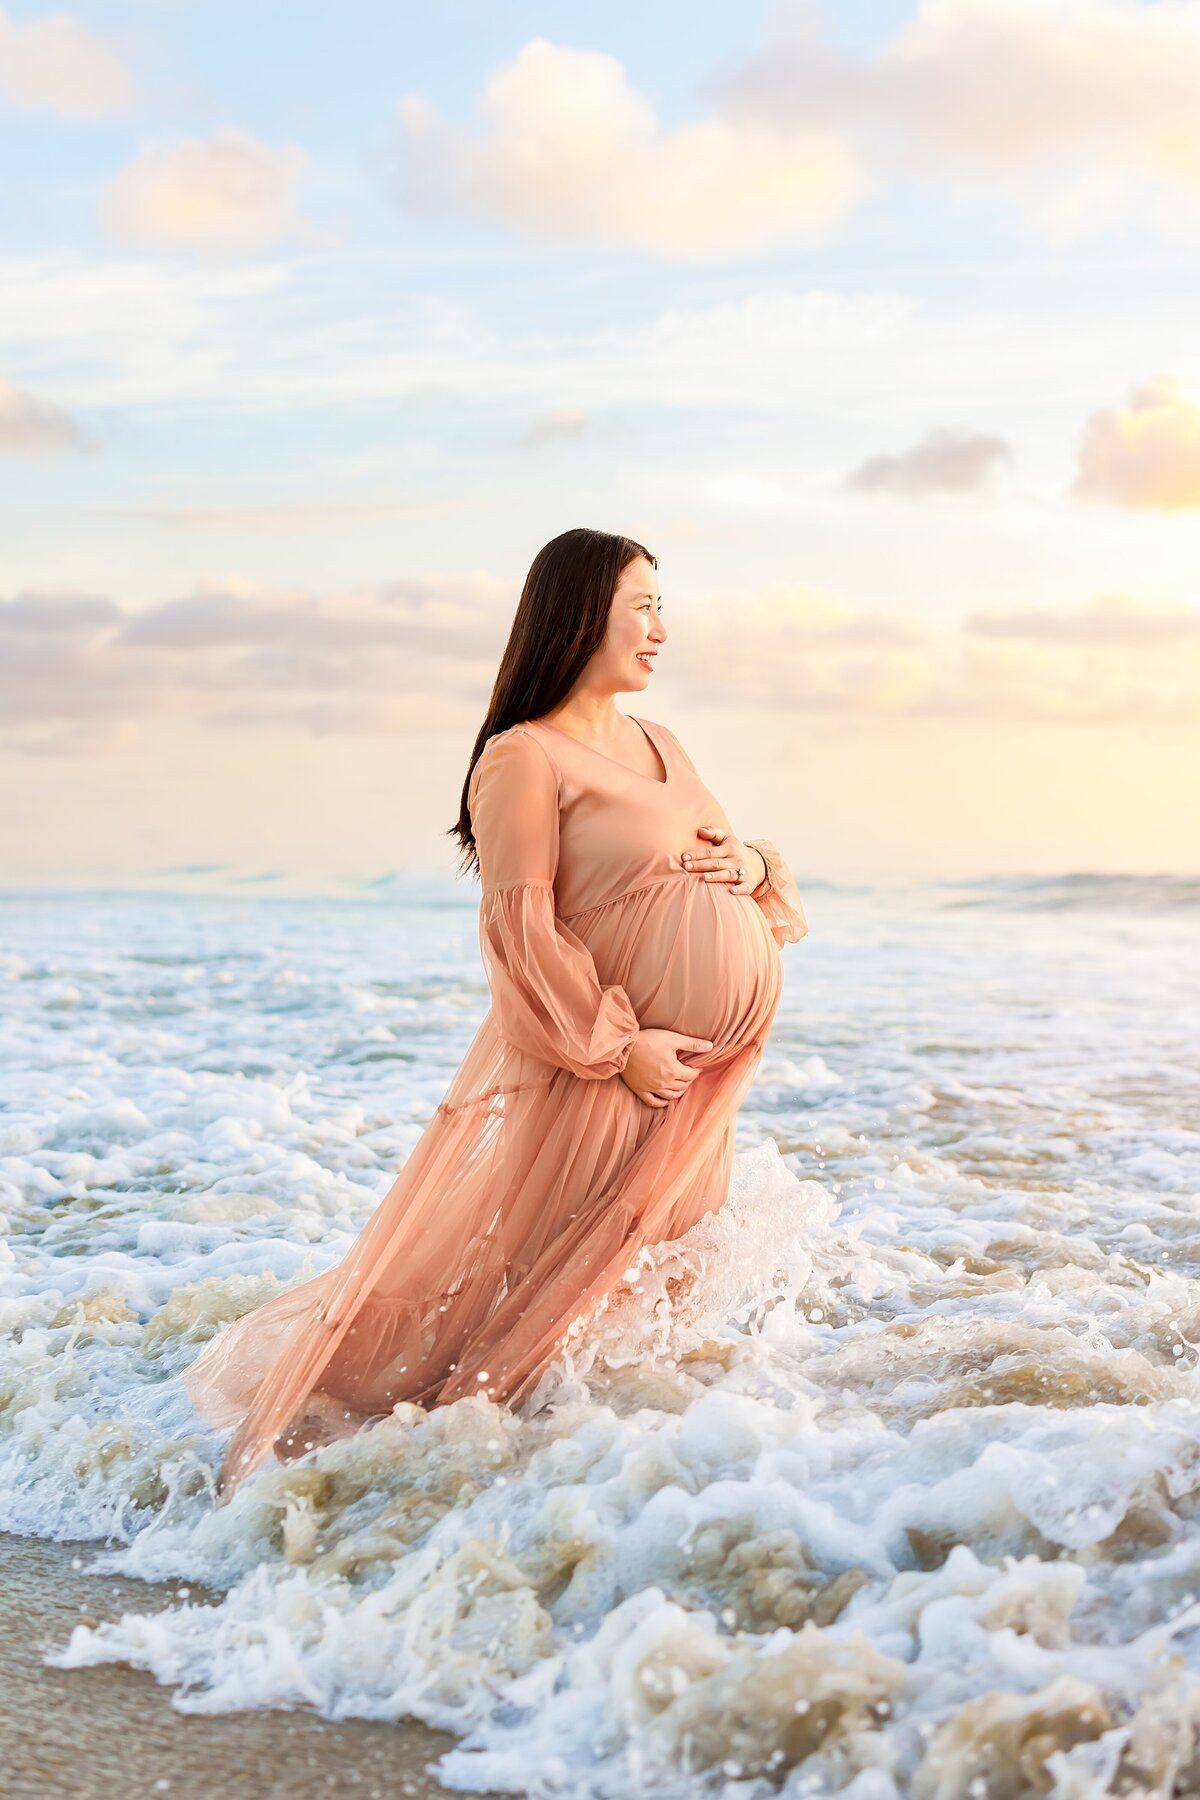 Maternity portrait of woman looking out over the ocean while waves splash around her in San Diego